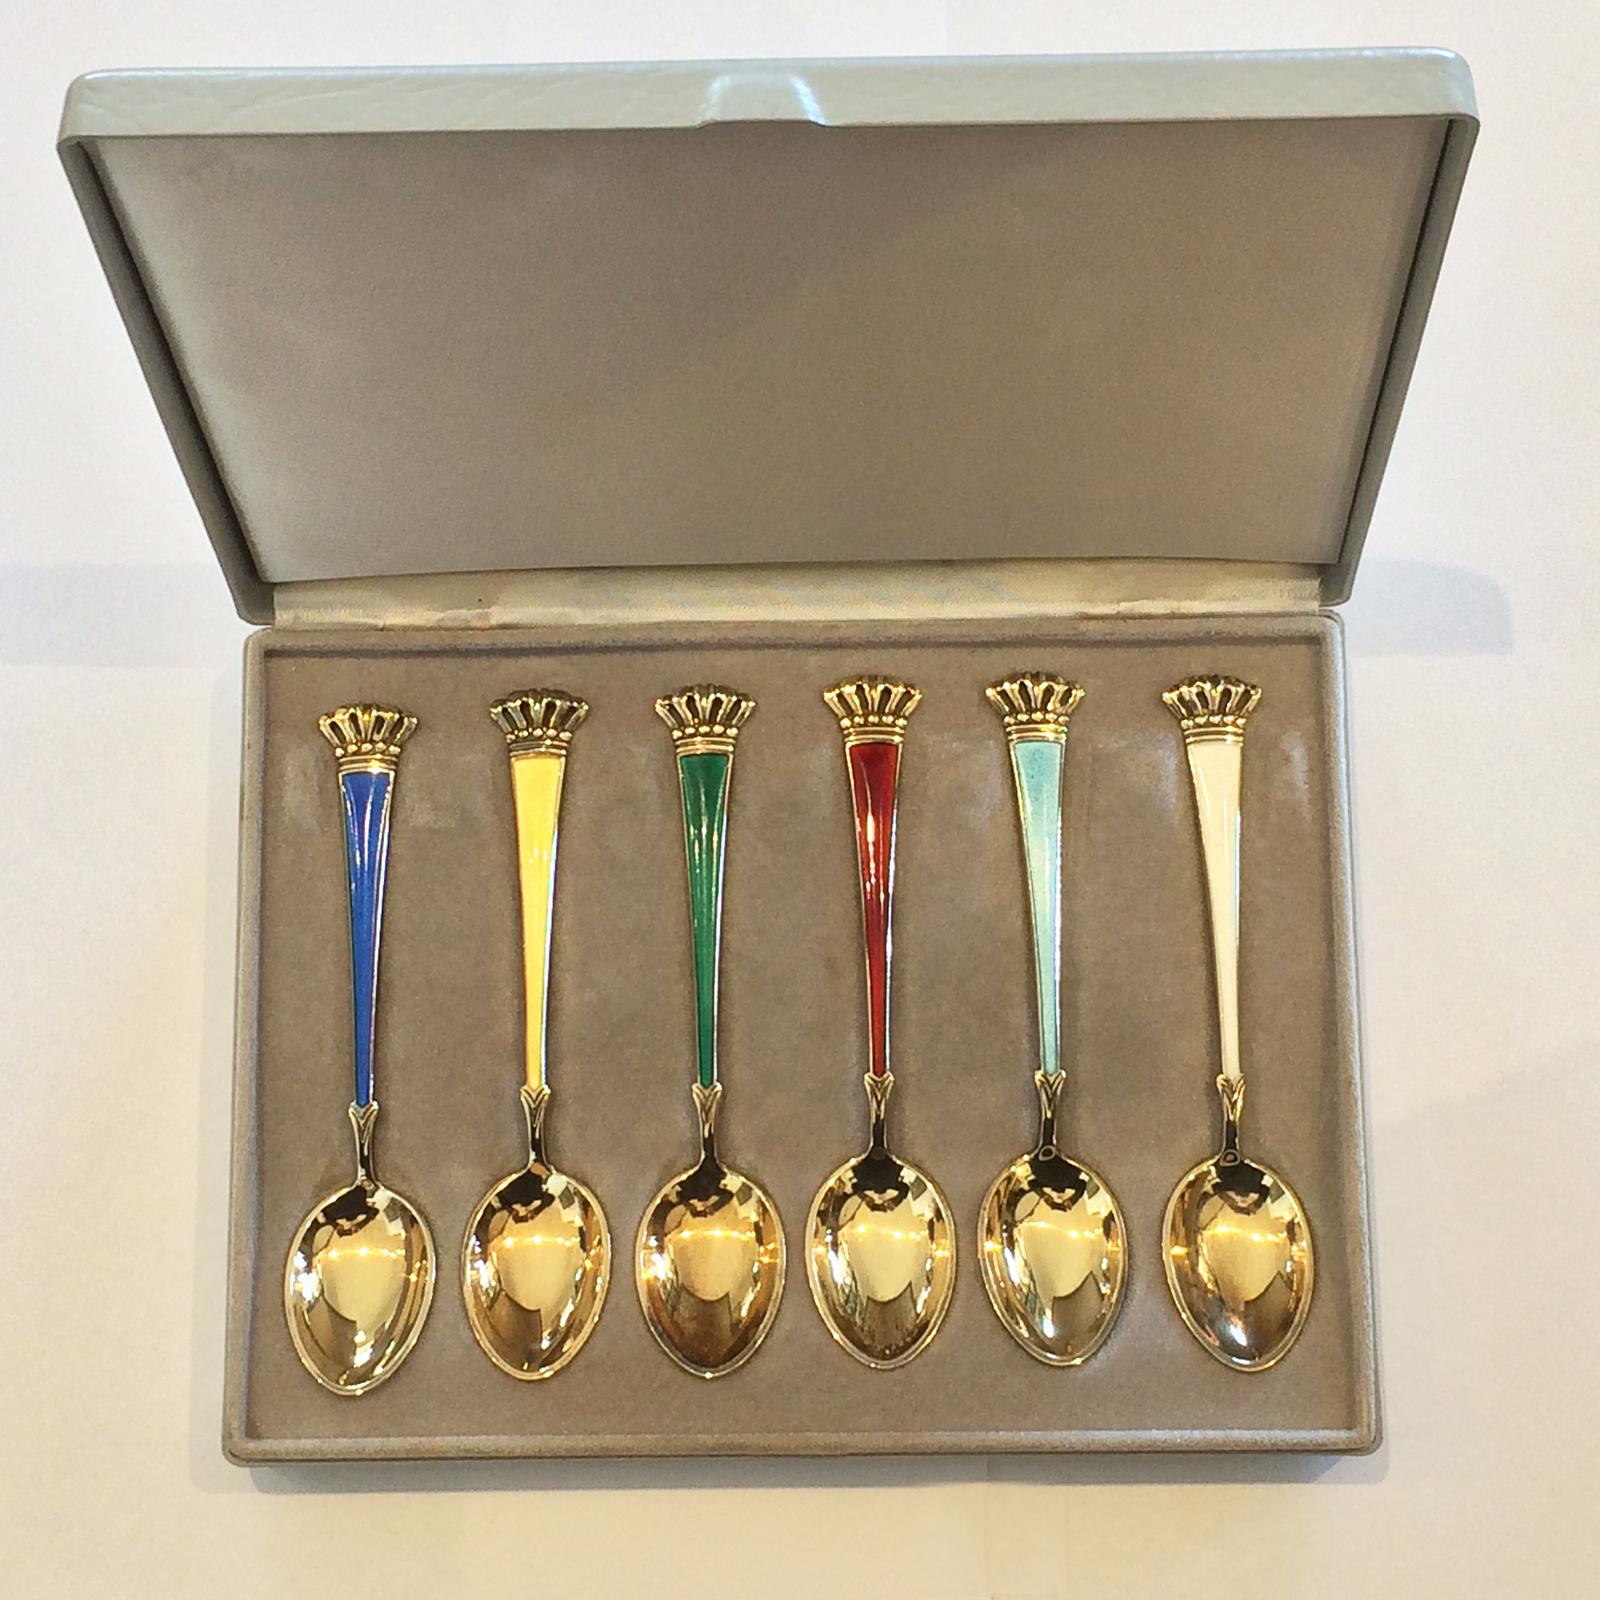 Art Deco Danish 925s gilt silver set o 6 teaspoons with Guilloche enameling. In original box. All spoons being excellent condition. Bearing the “Crown of Denmark” at the top, and fine decoration immediately below and also at the start of the spoon